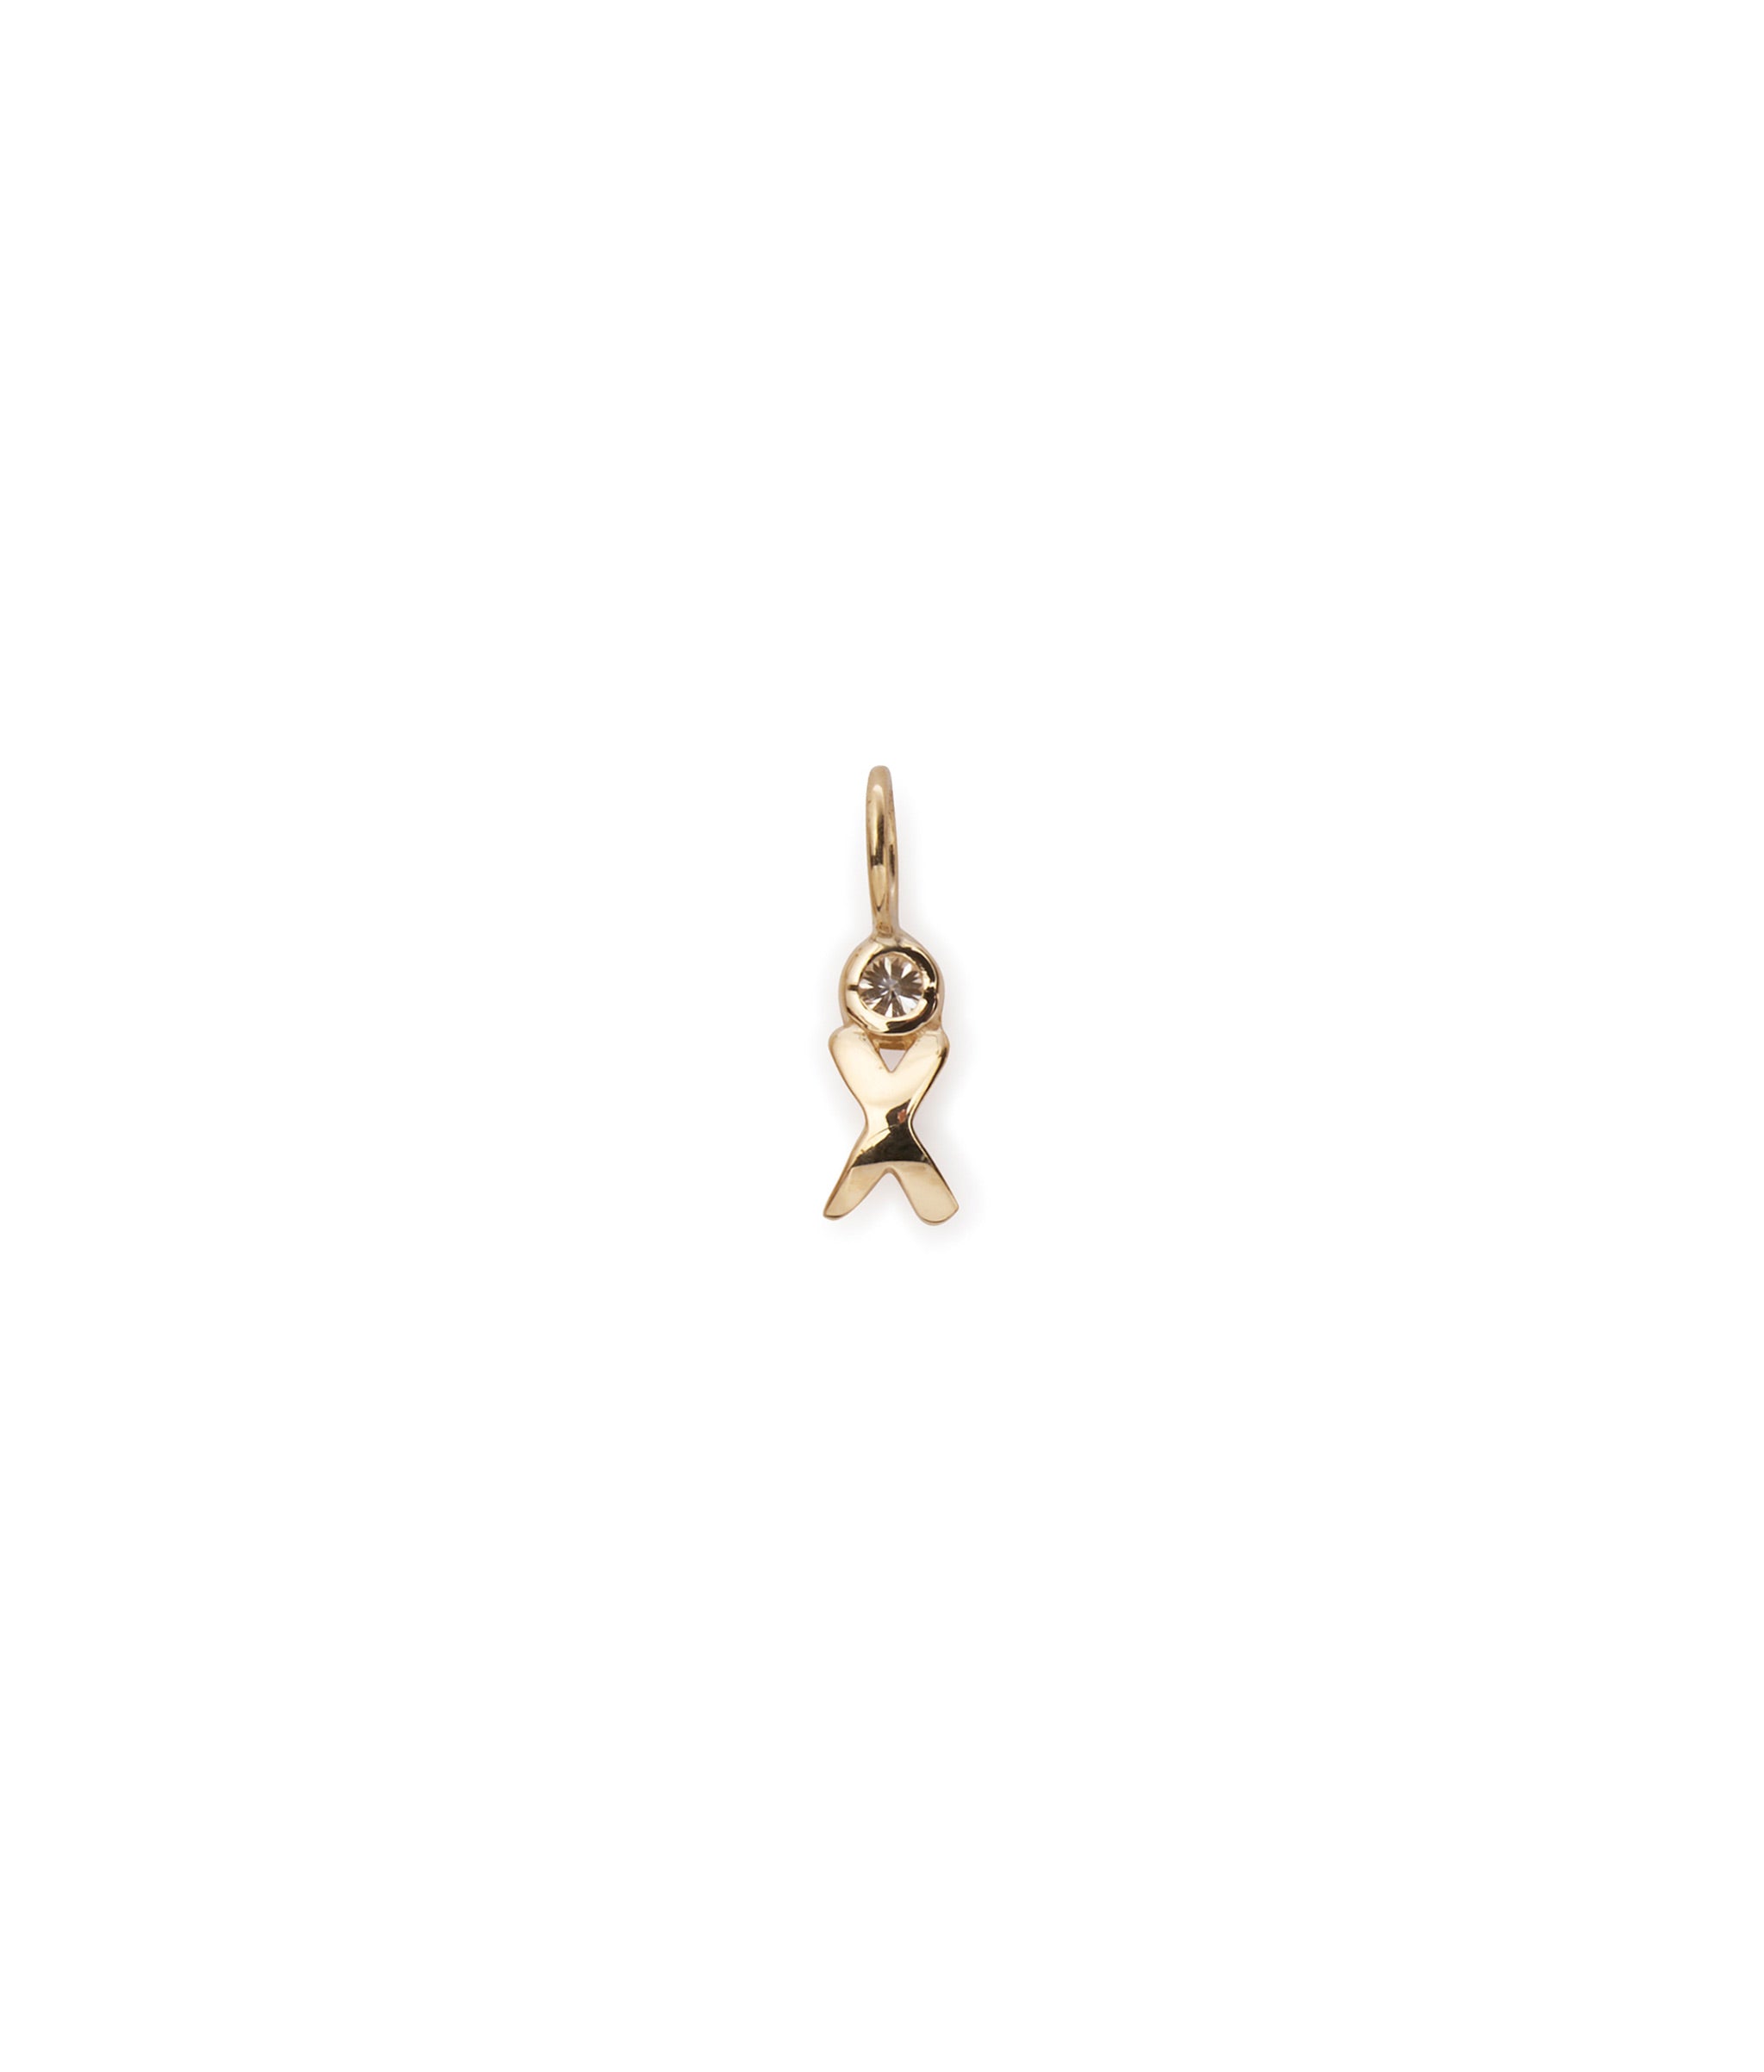 Alphabet Soup "X" Charm. Puffy mini 14k gold letter "X" charm with round diamond accent.